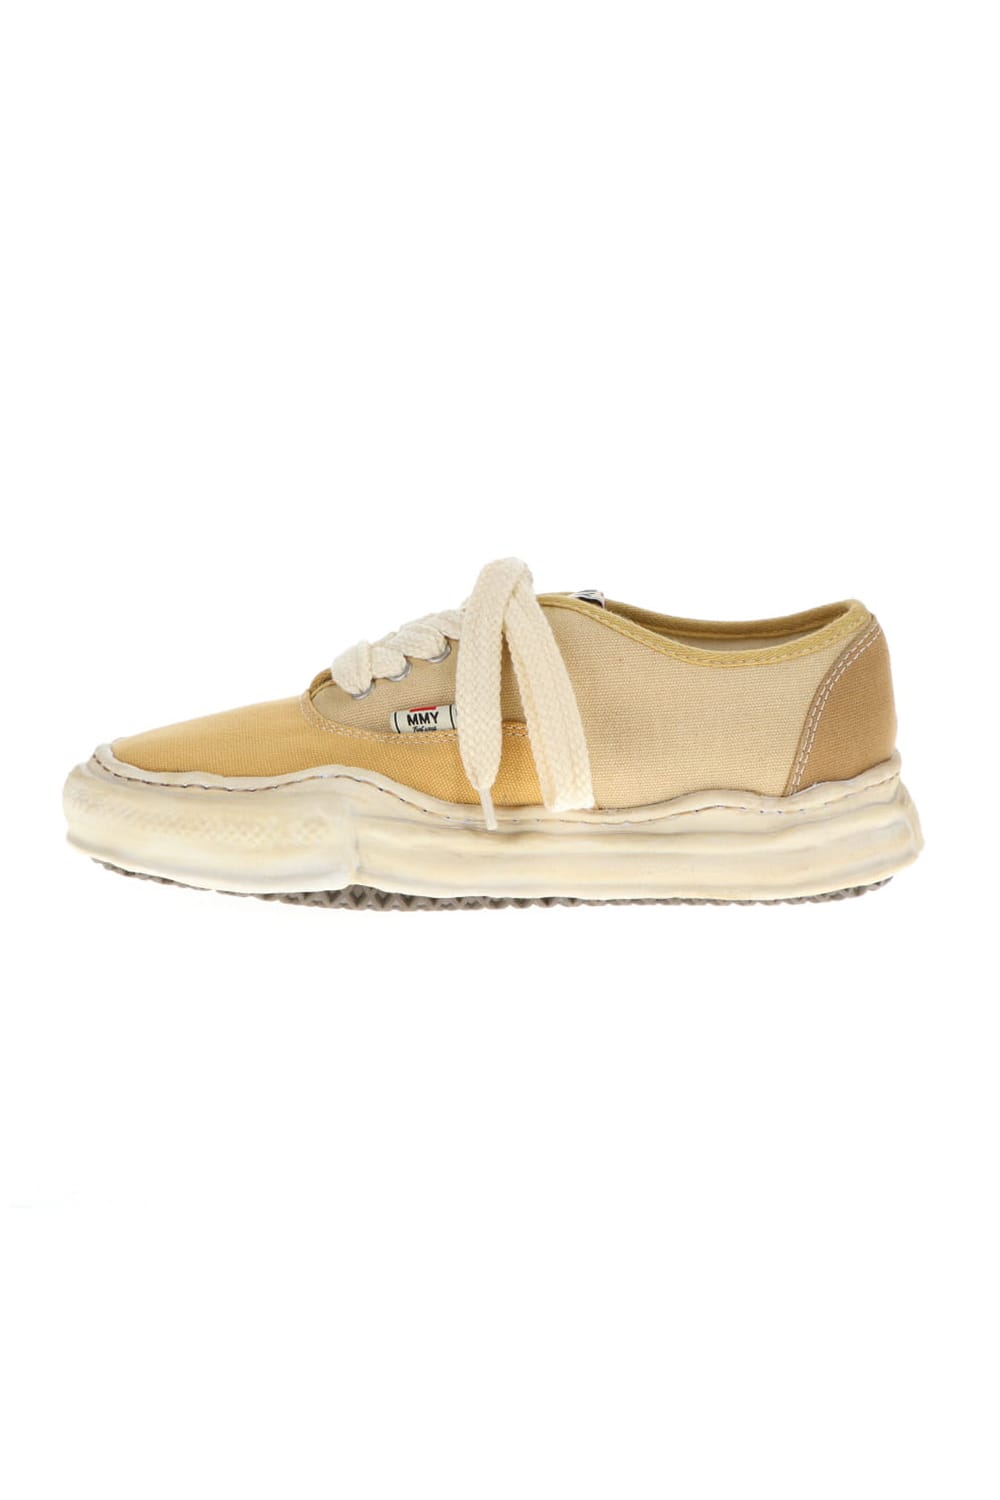 -BAKER- Over-dyed original sole canvas Low-Top sneakers Yellow